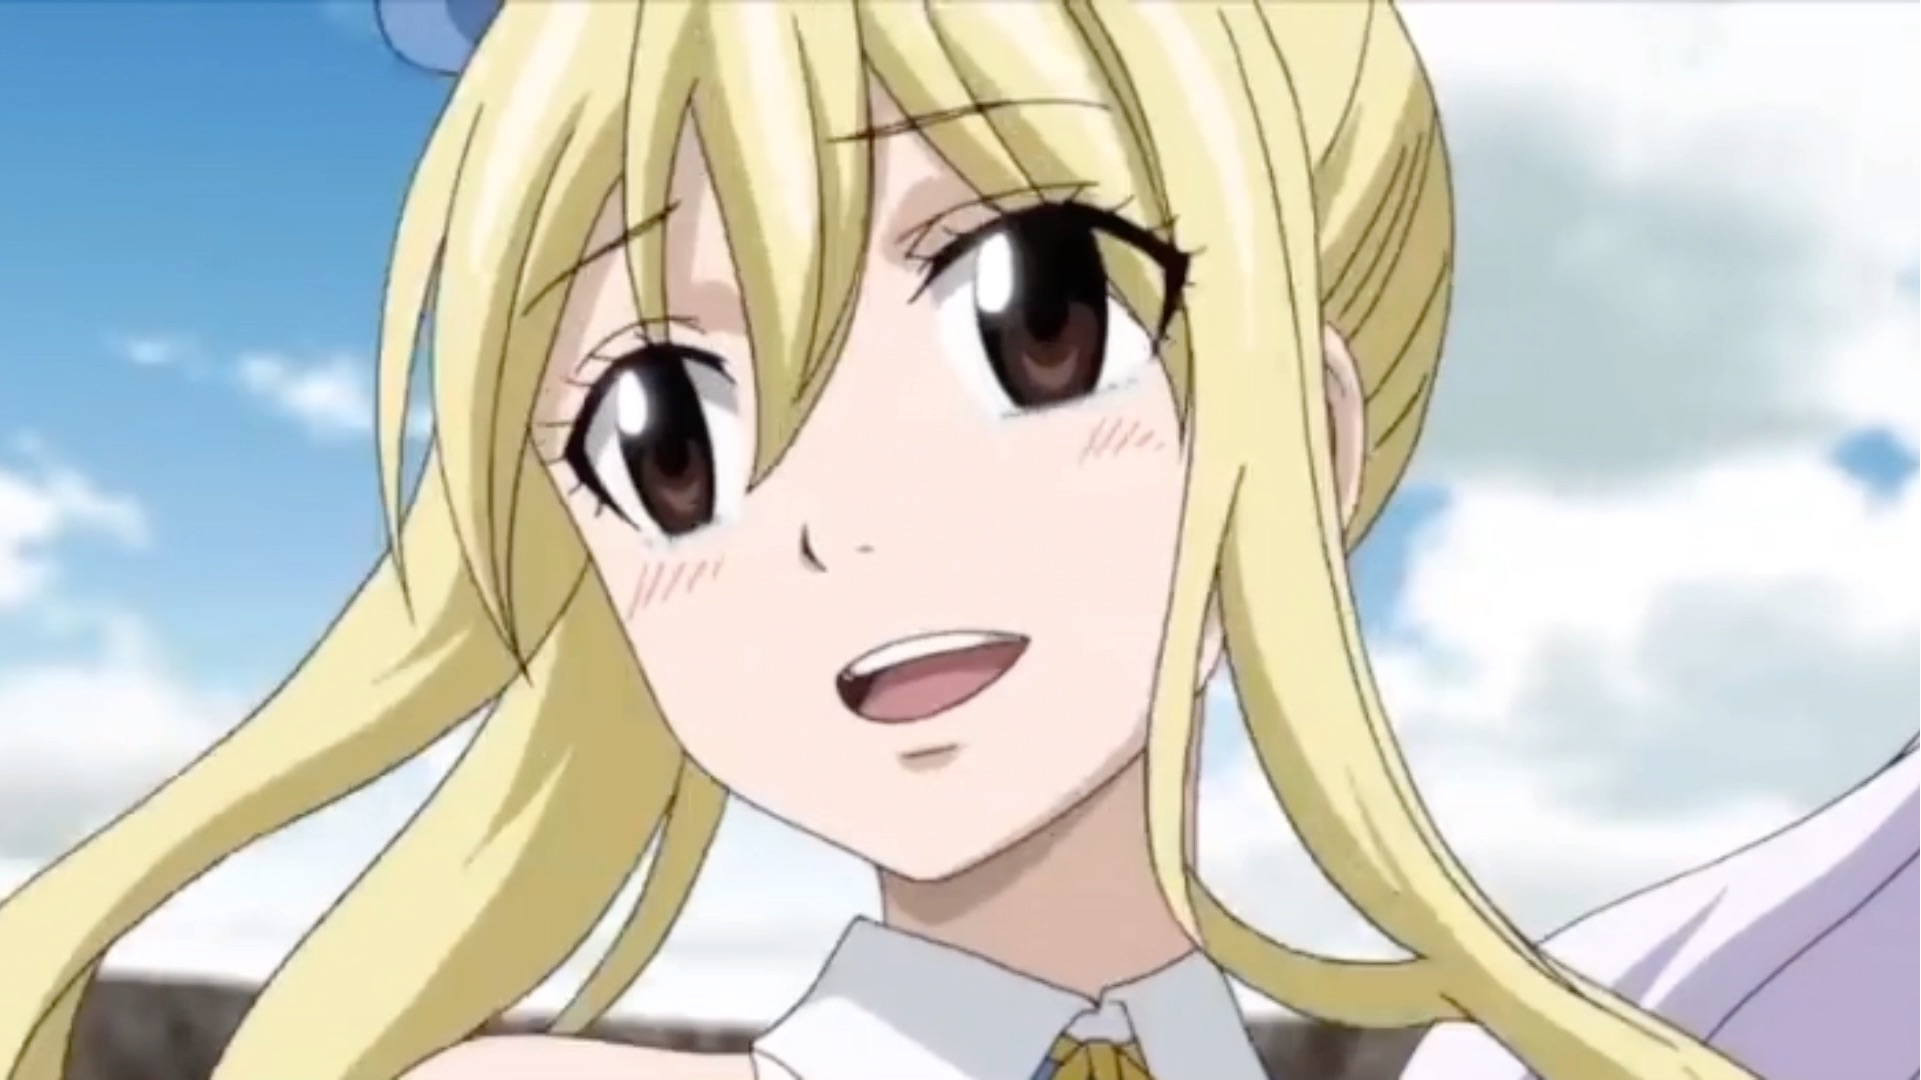 About Lucy Heartfilia